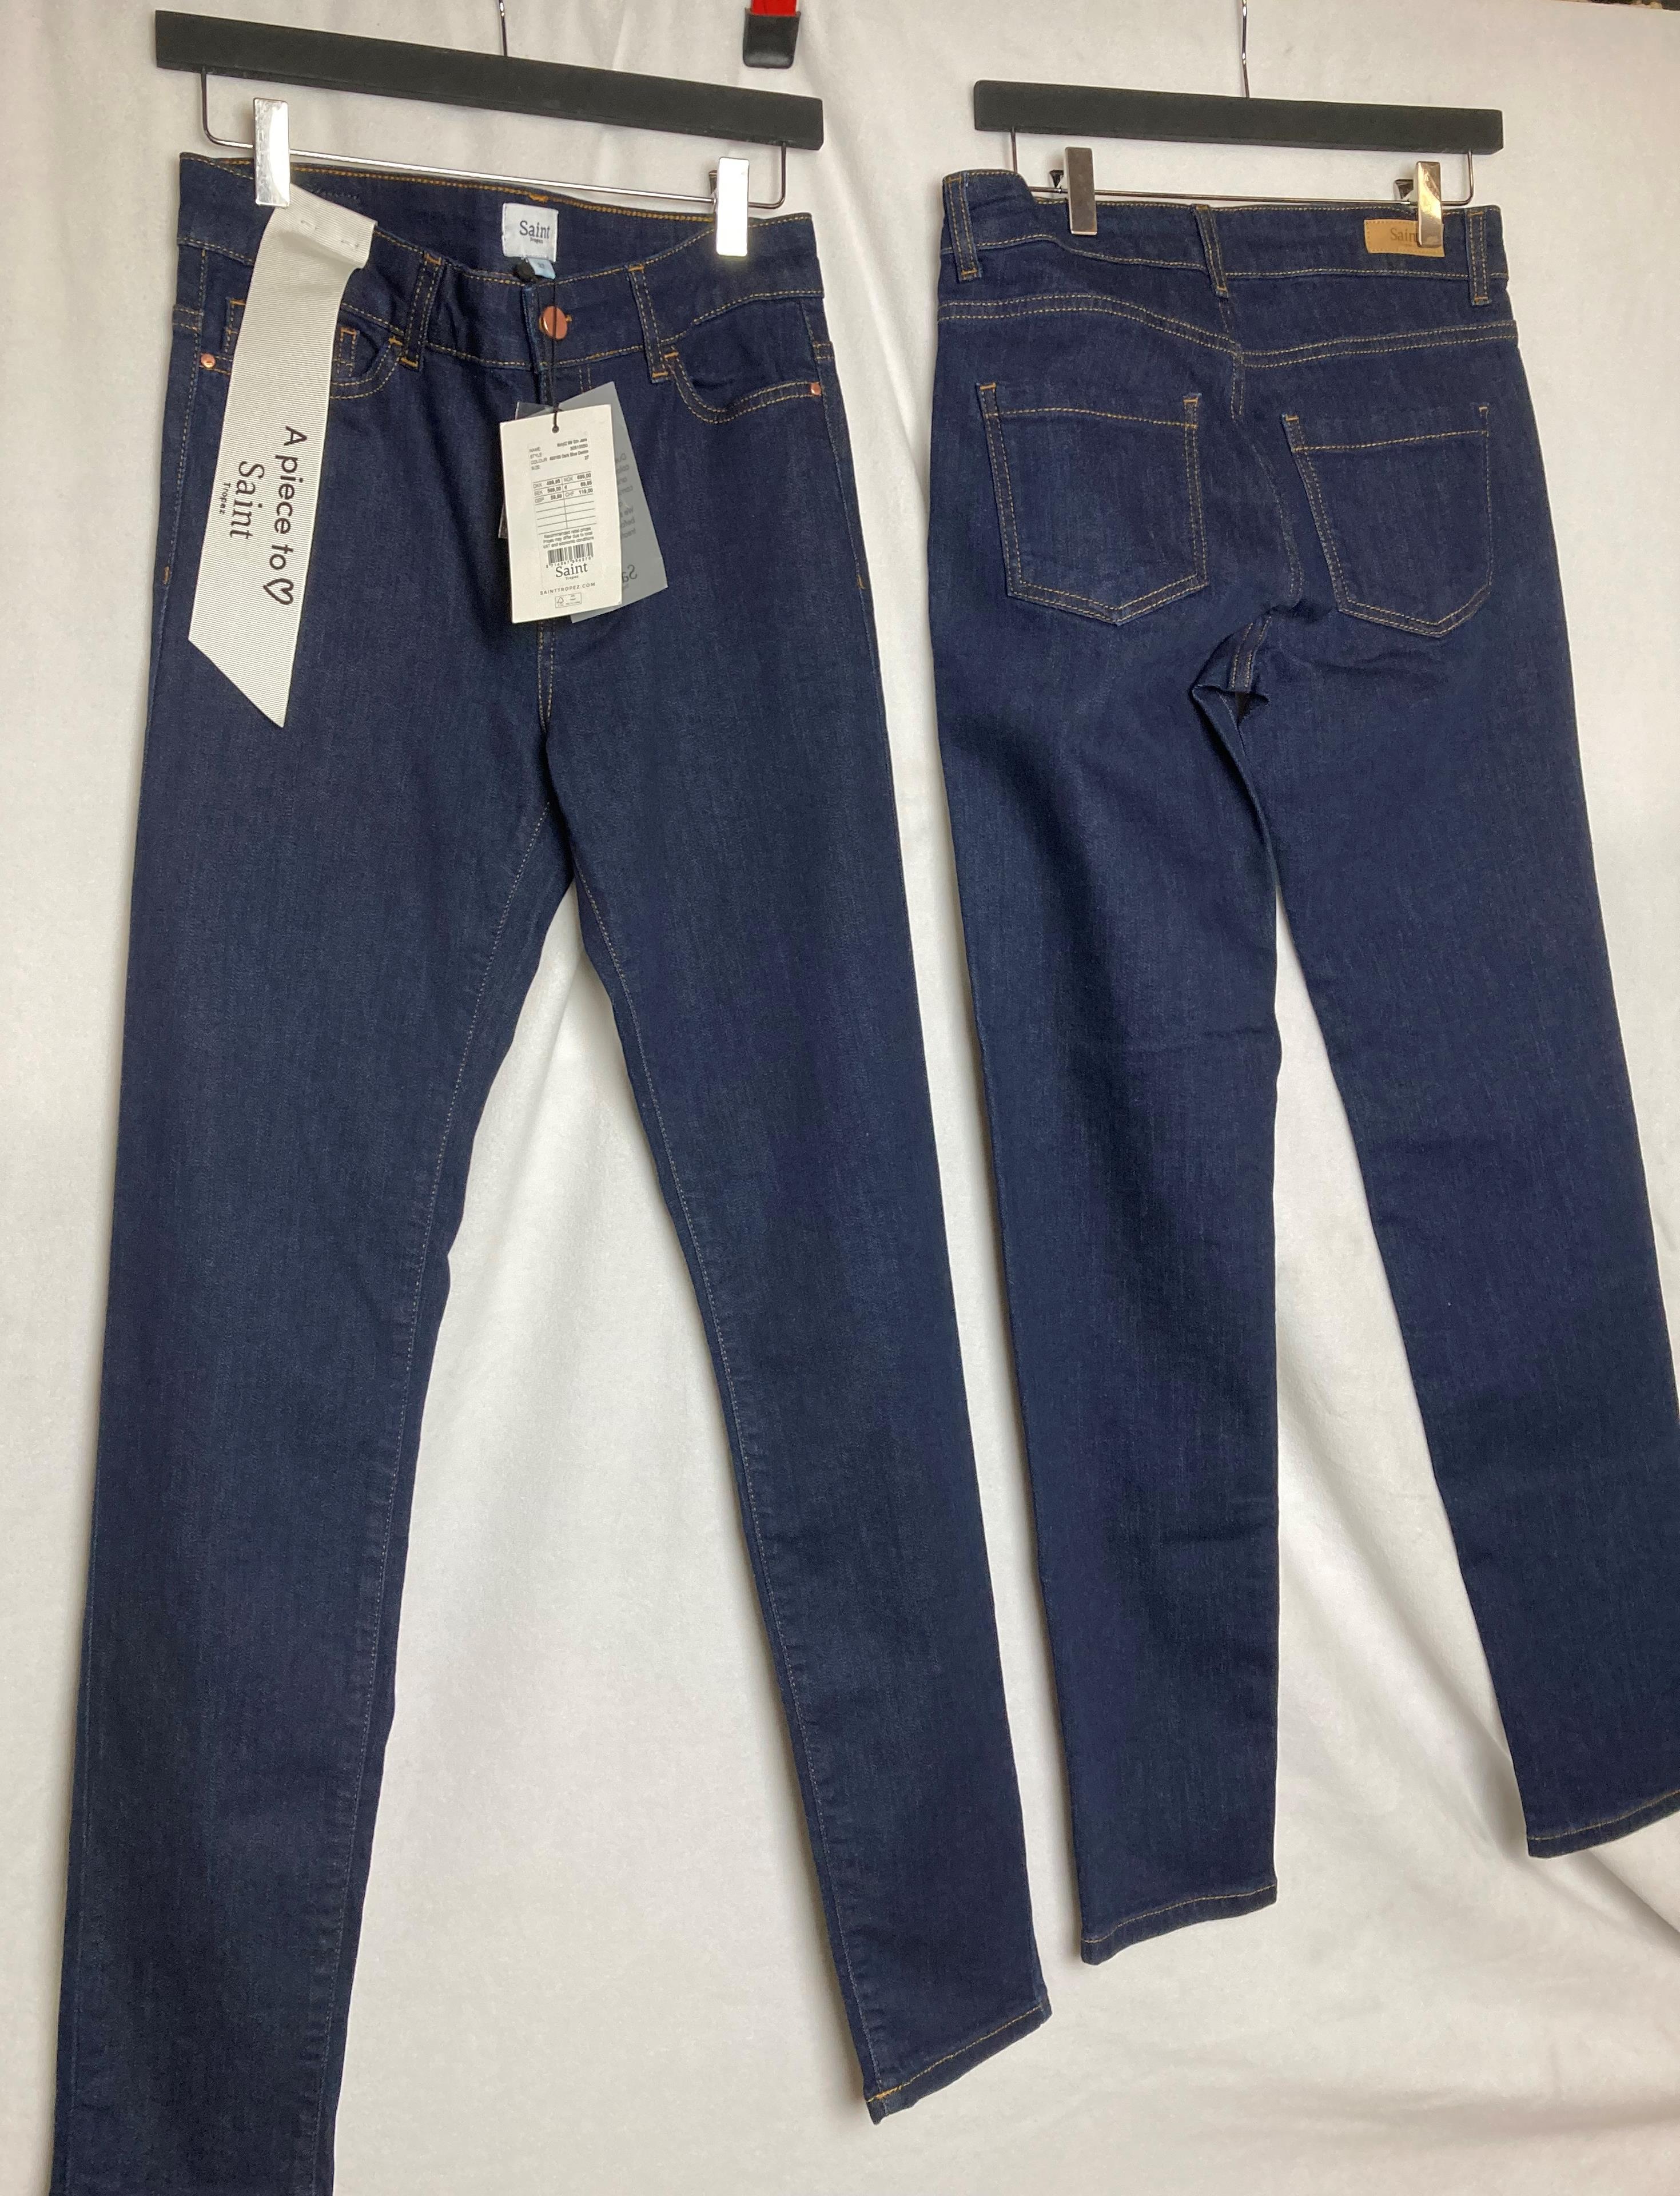 2 x pairs of SAINT TROPEZ dark blue ladies jeans in sizes 27 and 29 - RRP: £59.